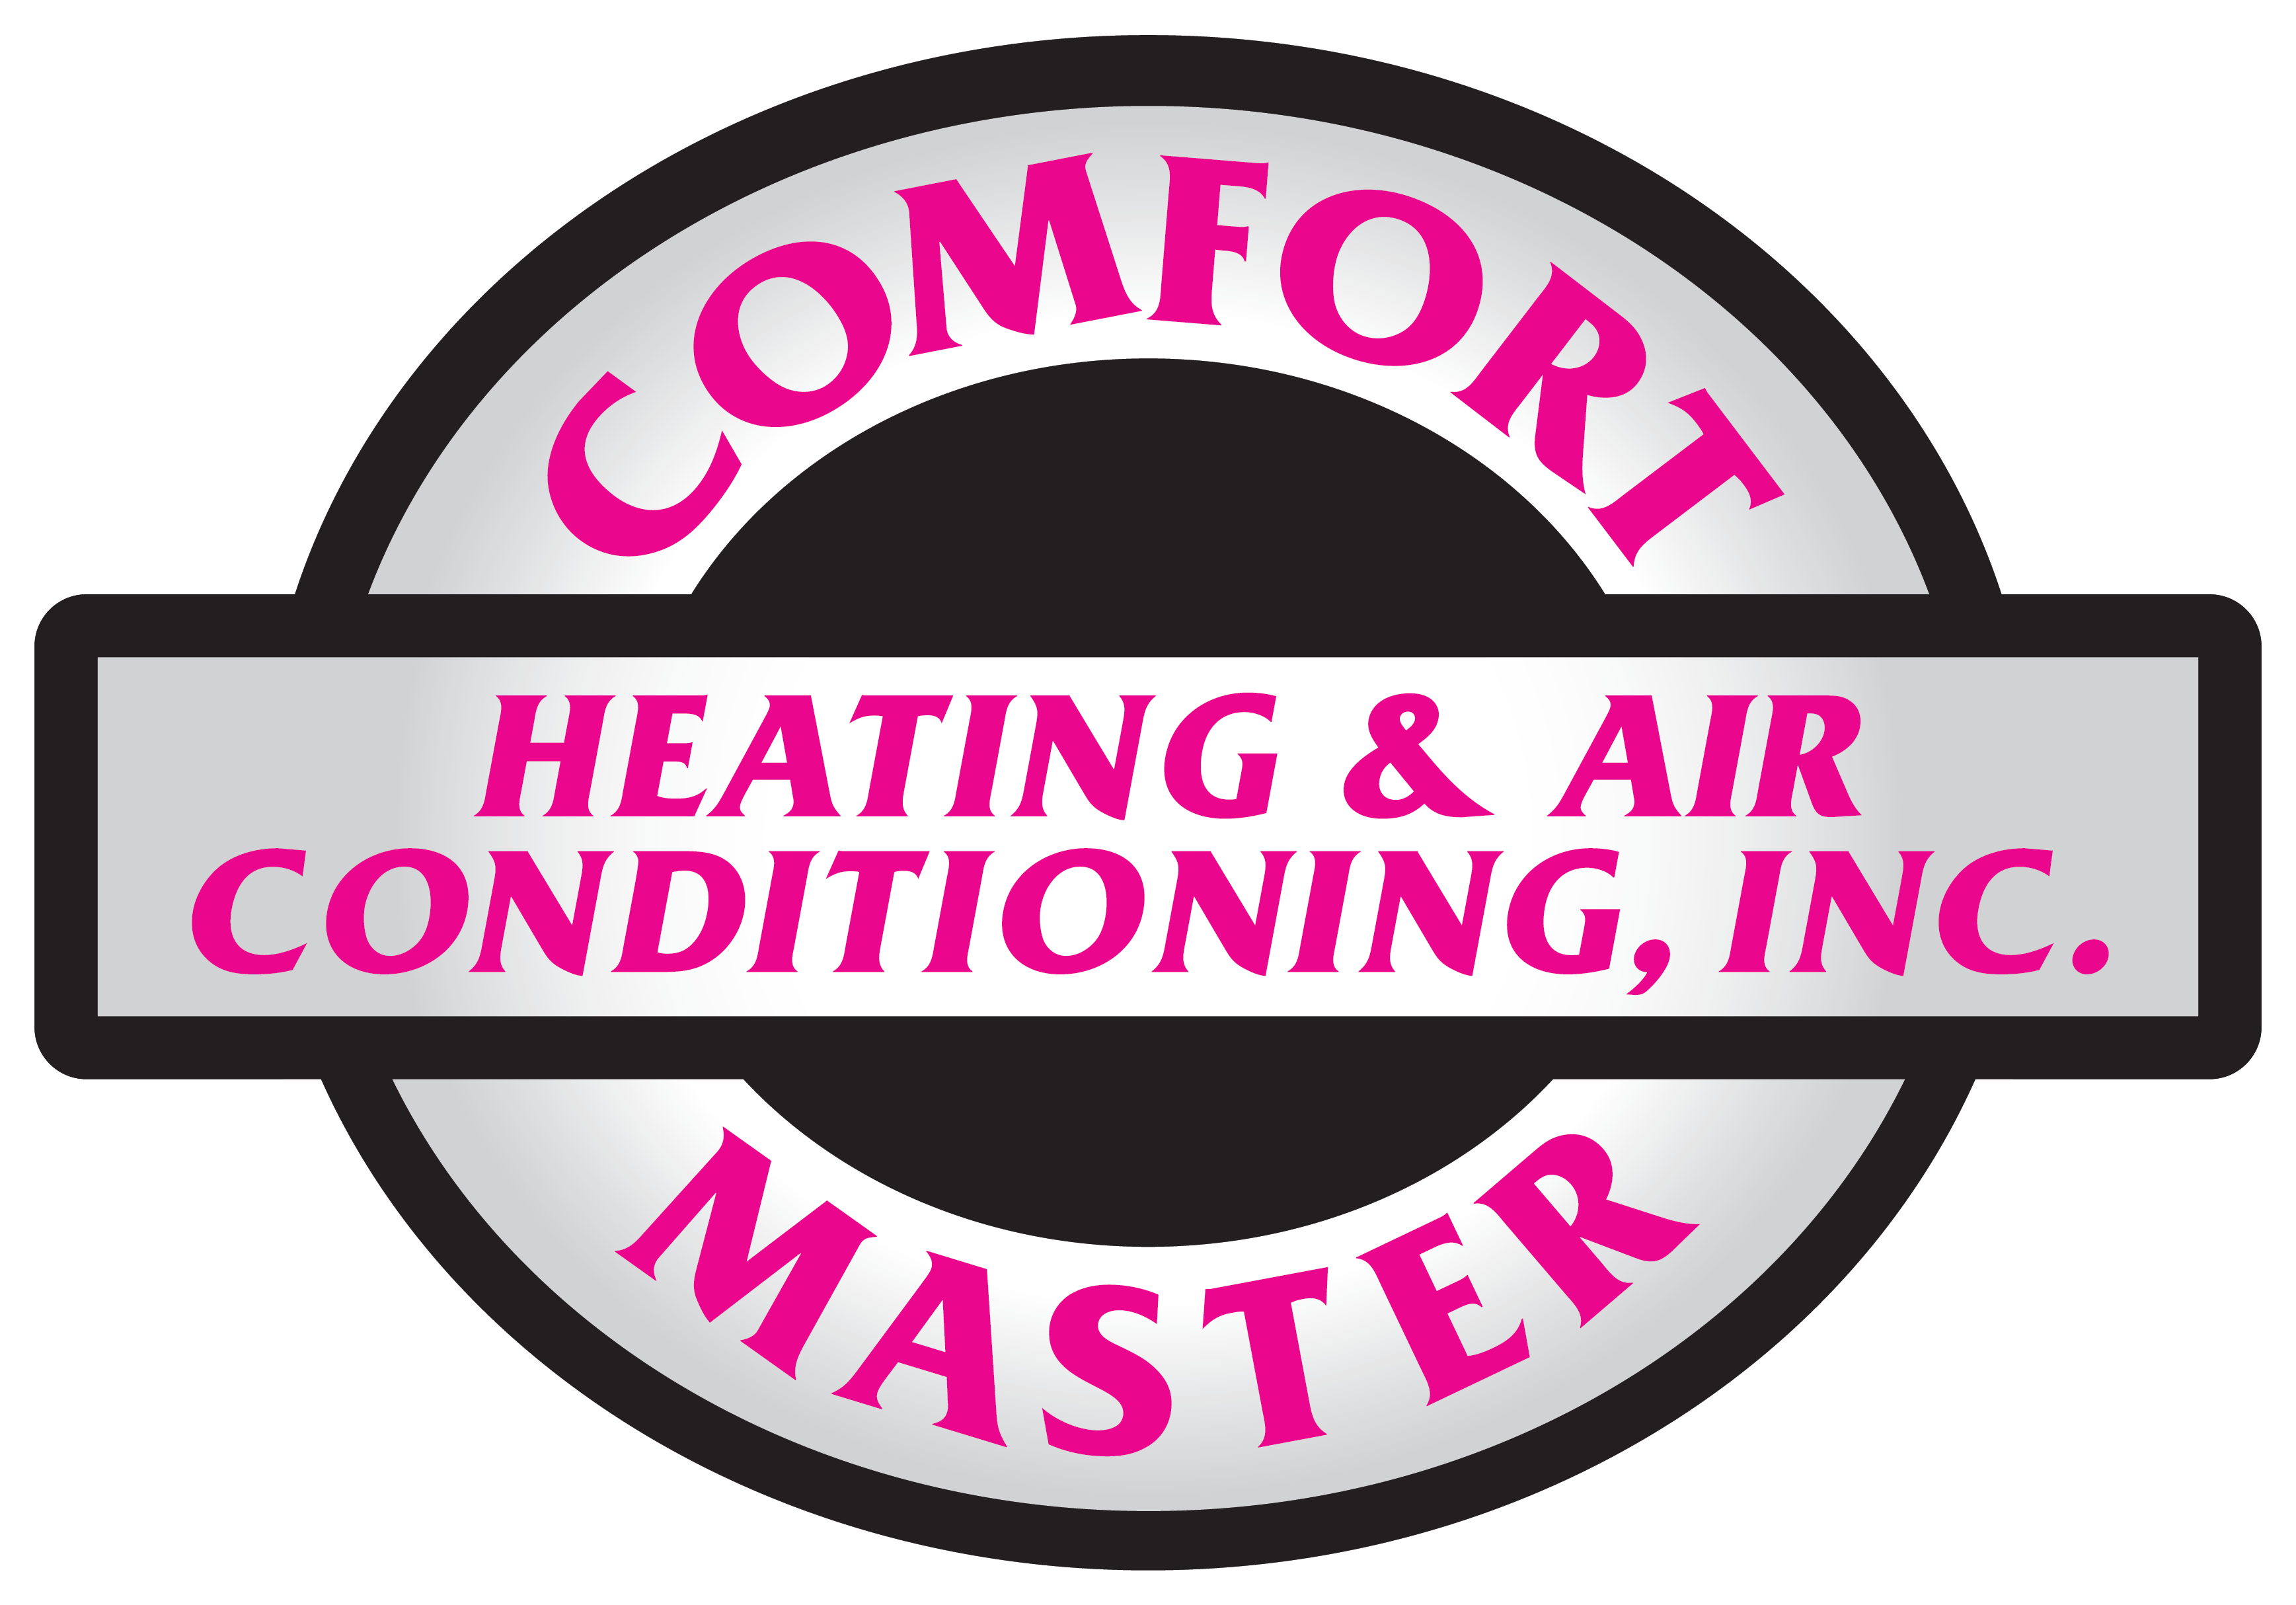 Comfort Master Heating & Air Conditioning